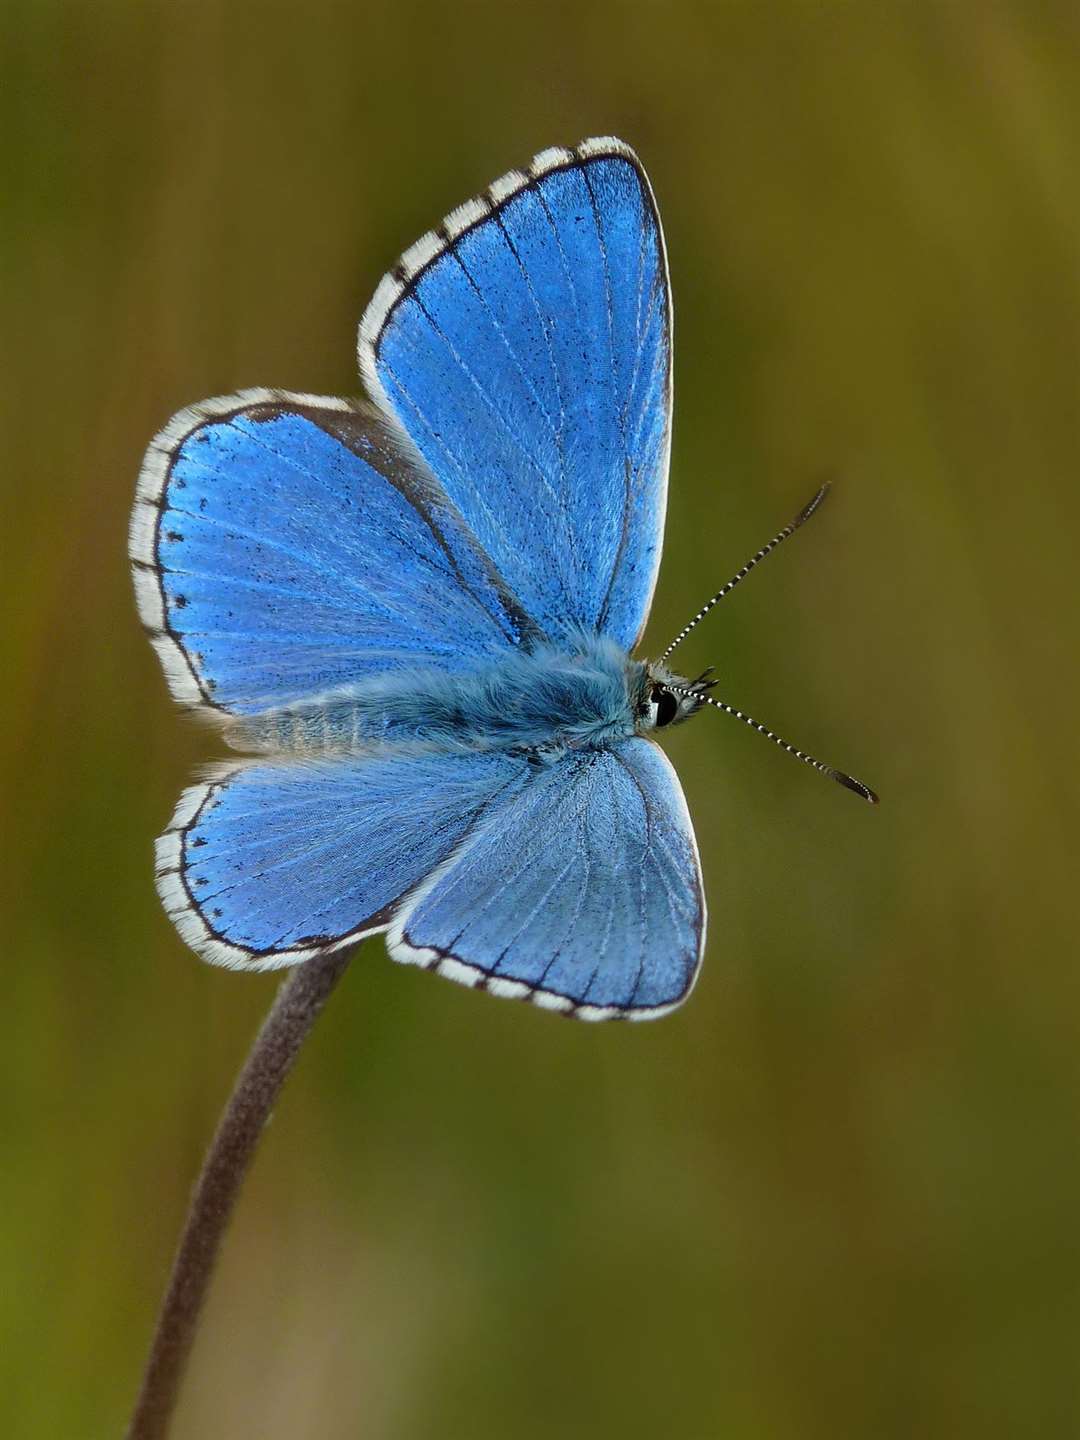 Adonis blue butterflies have been found at the Pyecombe golf course (Neil Hulme/South Down National Park Authority/PA)